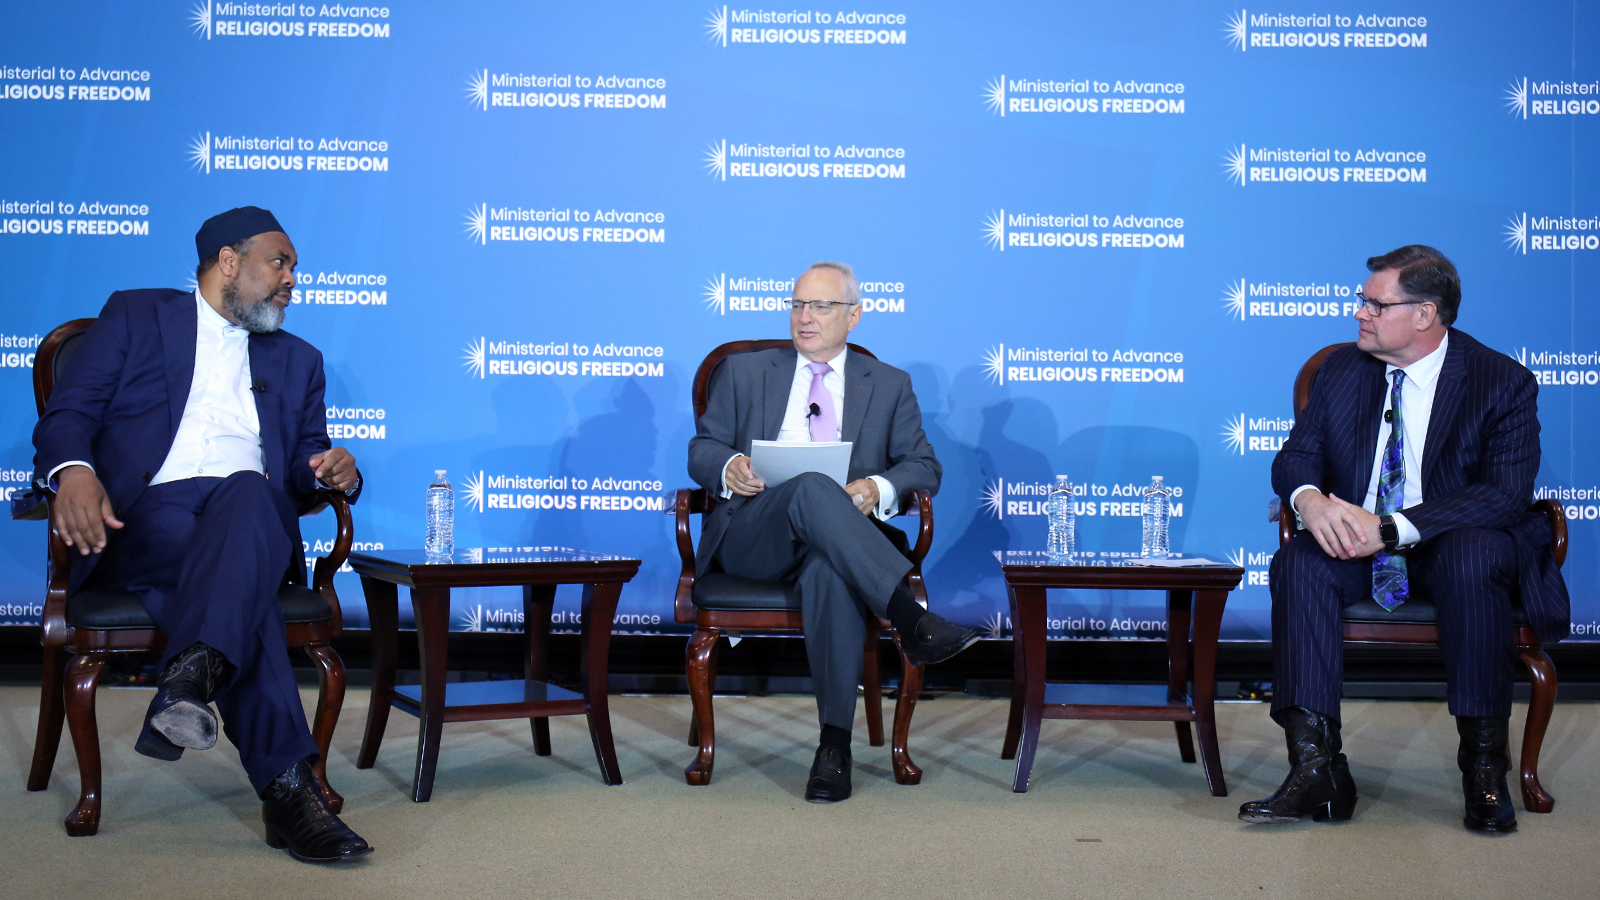 Imam Mohamed Magid, left, Rabbi David Saperstein, and minister Bob Roberts participate in a panel discussion on Different Faiths Advancing Religious Freedom Together at the Ministerial to Advance Religious Freedom at the U.S. Department of State in Washington, D.C., on July 17, 2019. State Department photo/ Public Domain